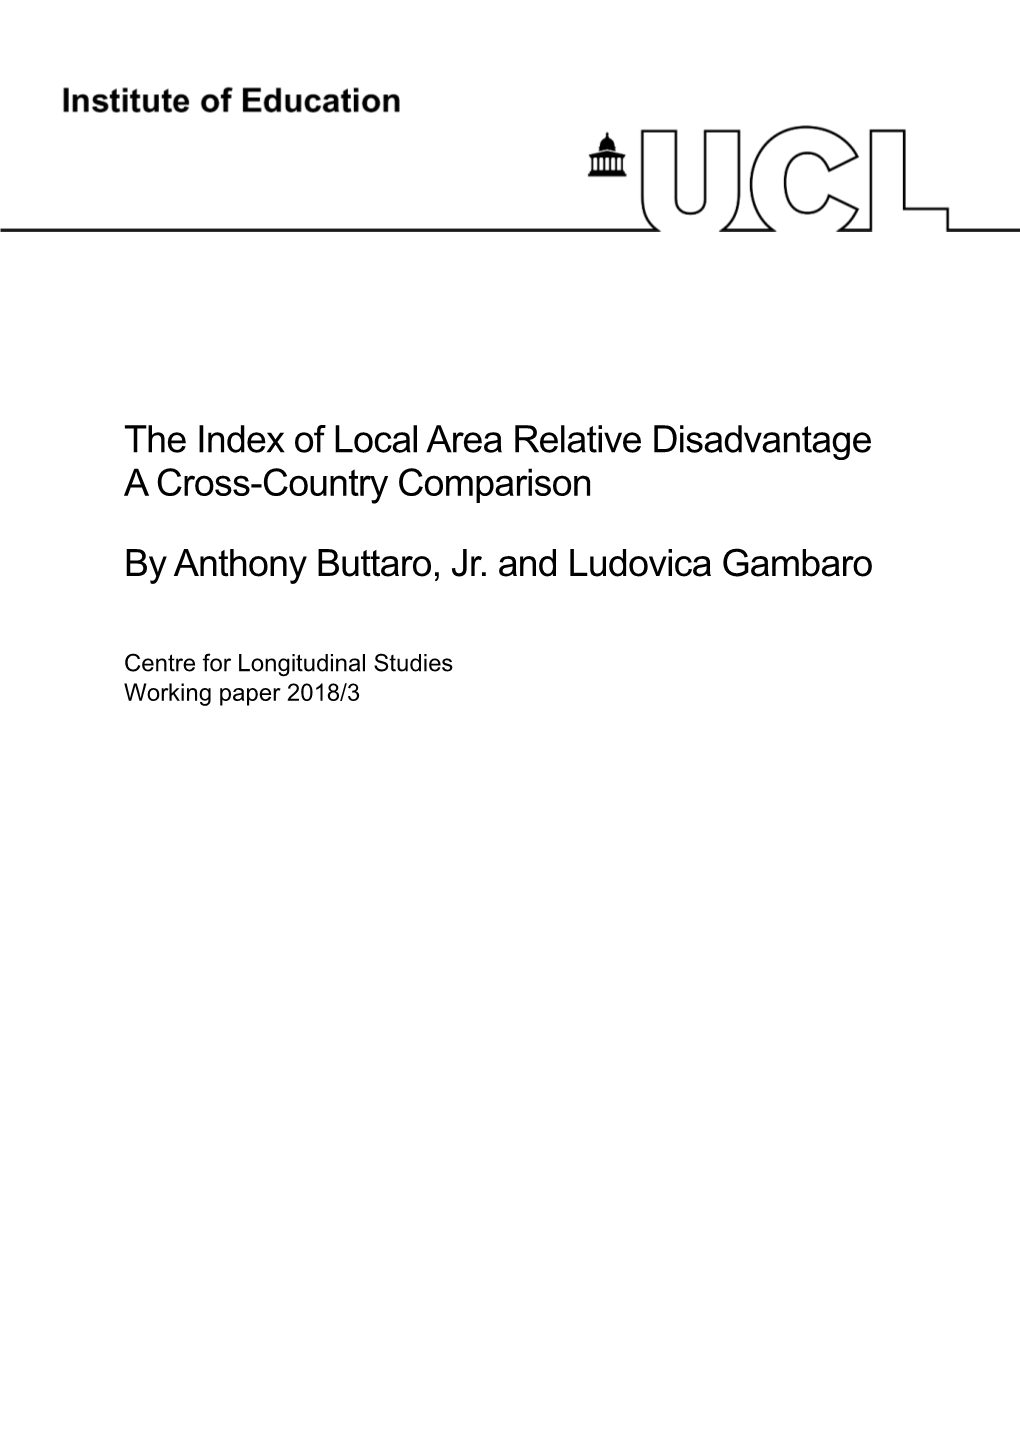 The Index of Local Area Relative Disadvantage a Cross-Country Comparison